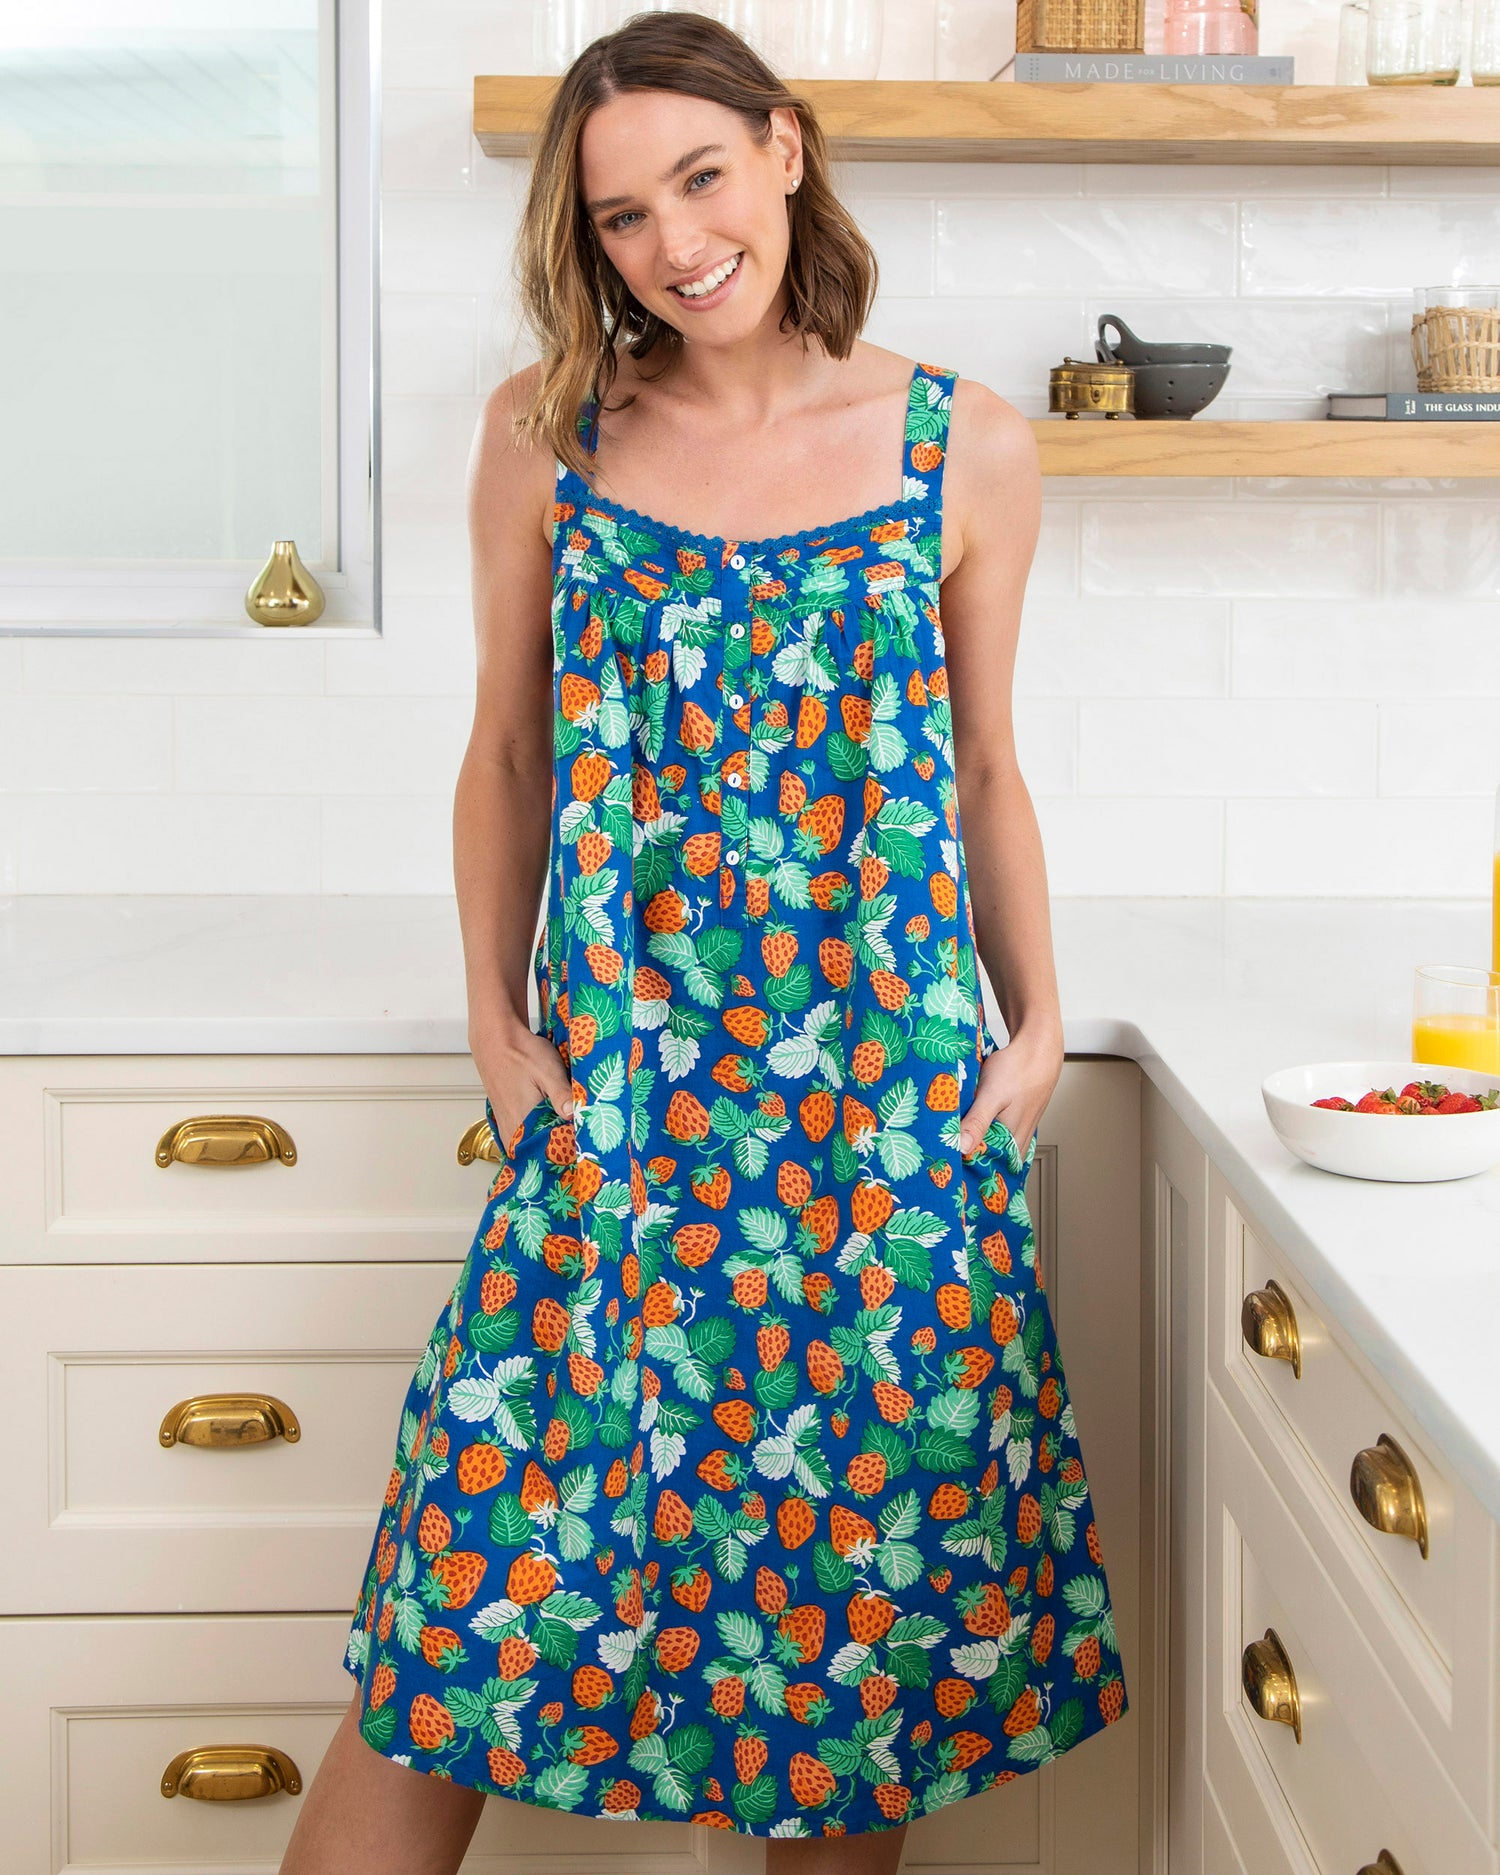 Strawberry Fields - Back to Bed Nightgown - Queen Blue - Printfresh